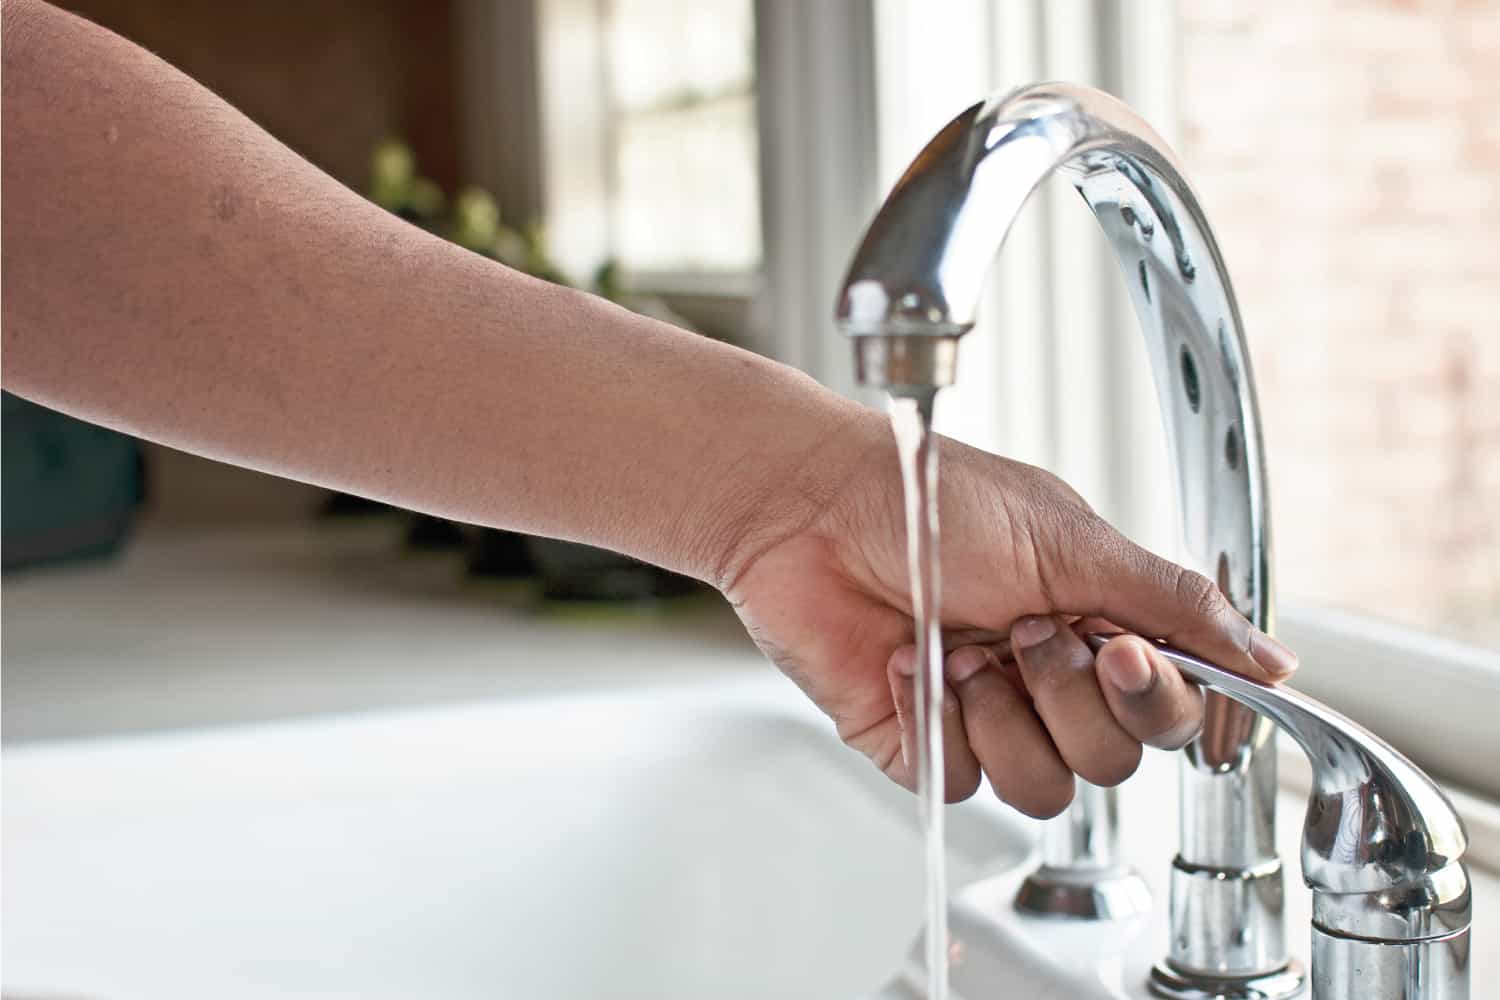 Close up of a left hand holding a push pull faucet near a window